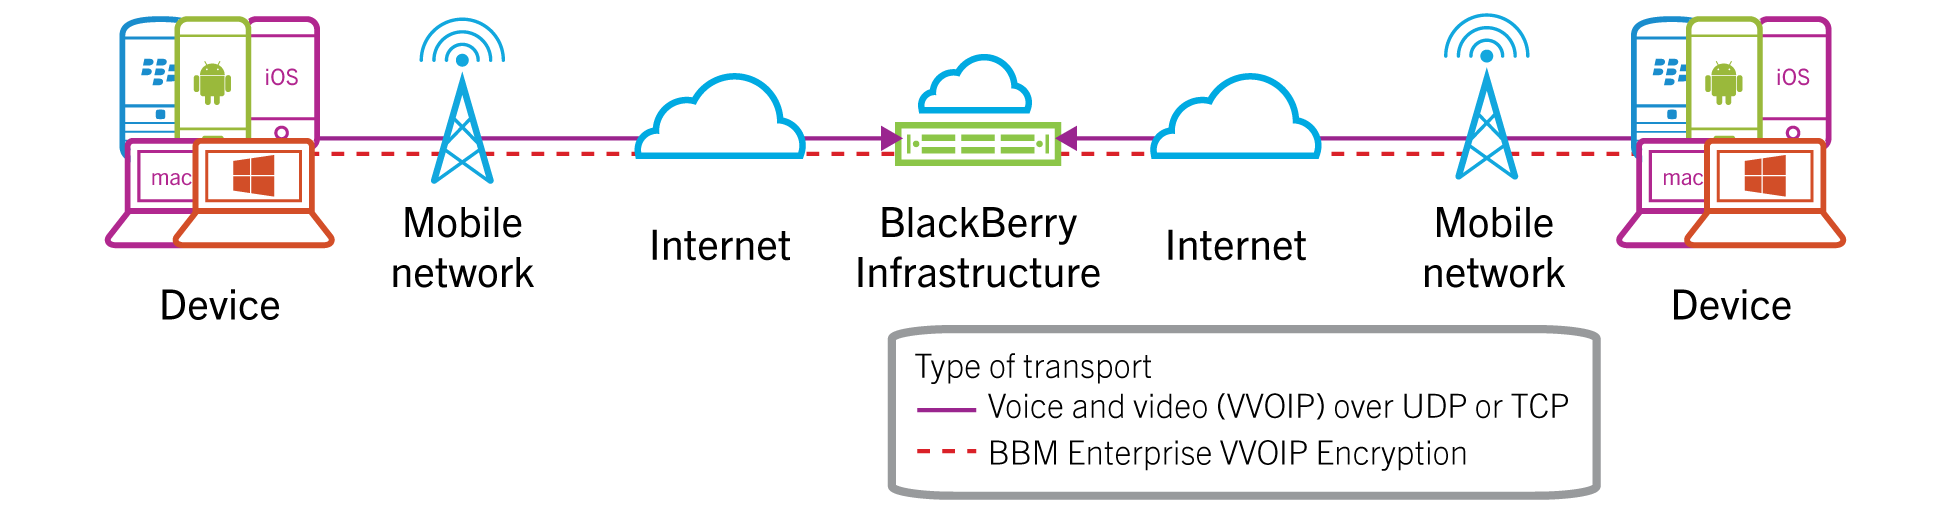 Architectural diagram showing howBBM Enterprise                        voice and video protects messages between a device on a mobile network and a                        device on a mobile network through the BlackBerry Infrastructure during data transfer